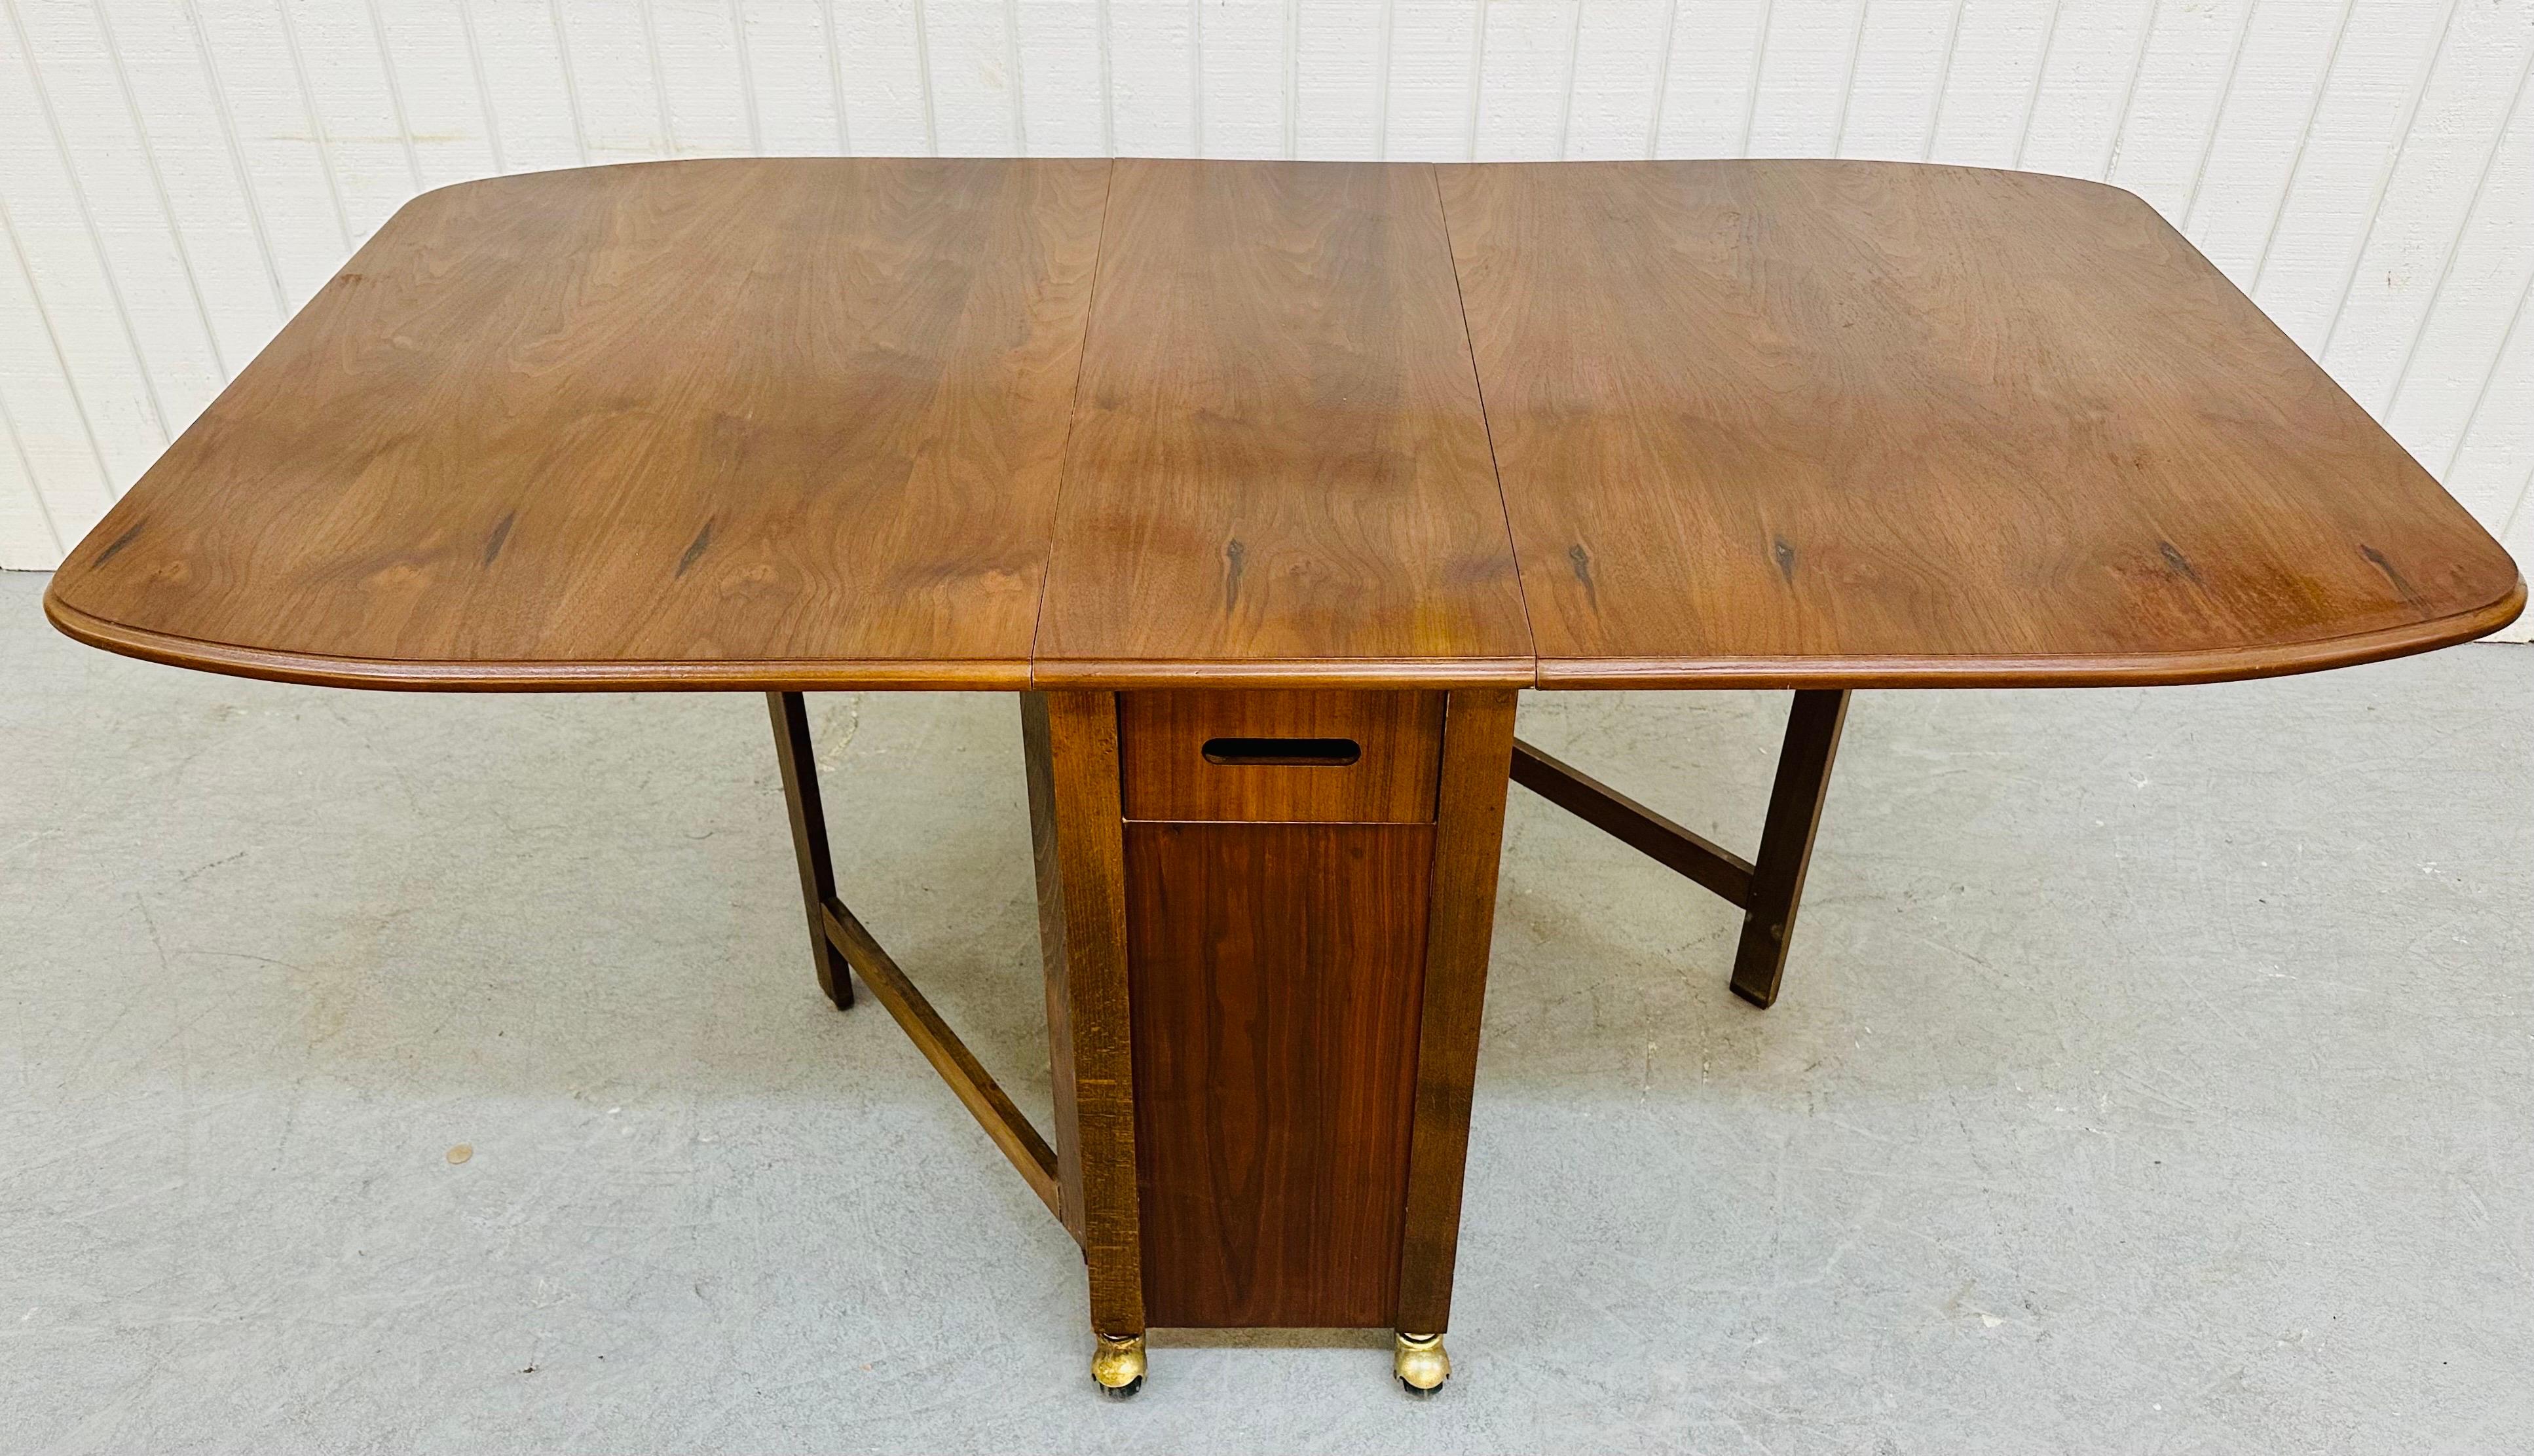 This listing is for a Mid-Century Modern Walnut Drop Leaf Dining Set. Featuring a walnut drop leaf table, four folding chairs with padded seats, original wheels, a pull out drawer for storage, and storage space for the four chairs. This is an